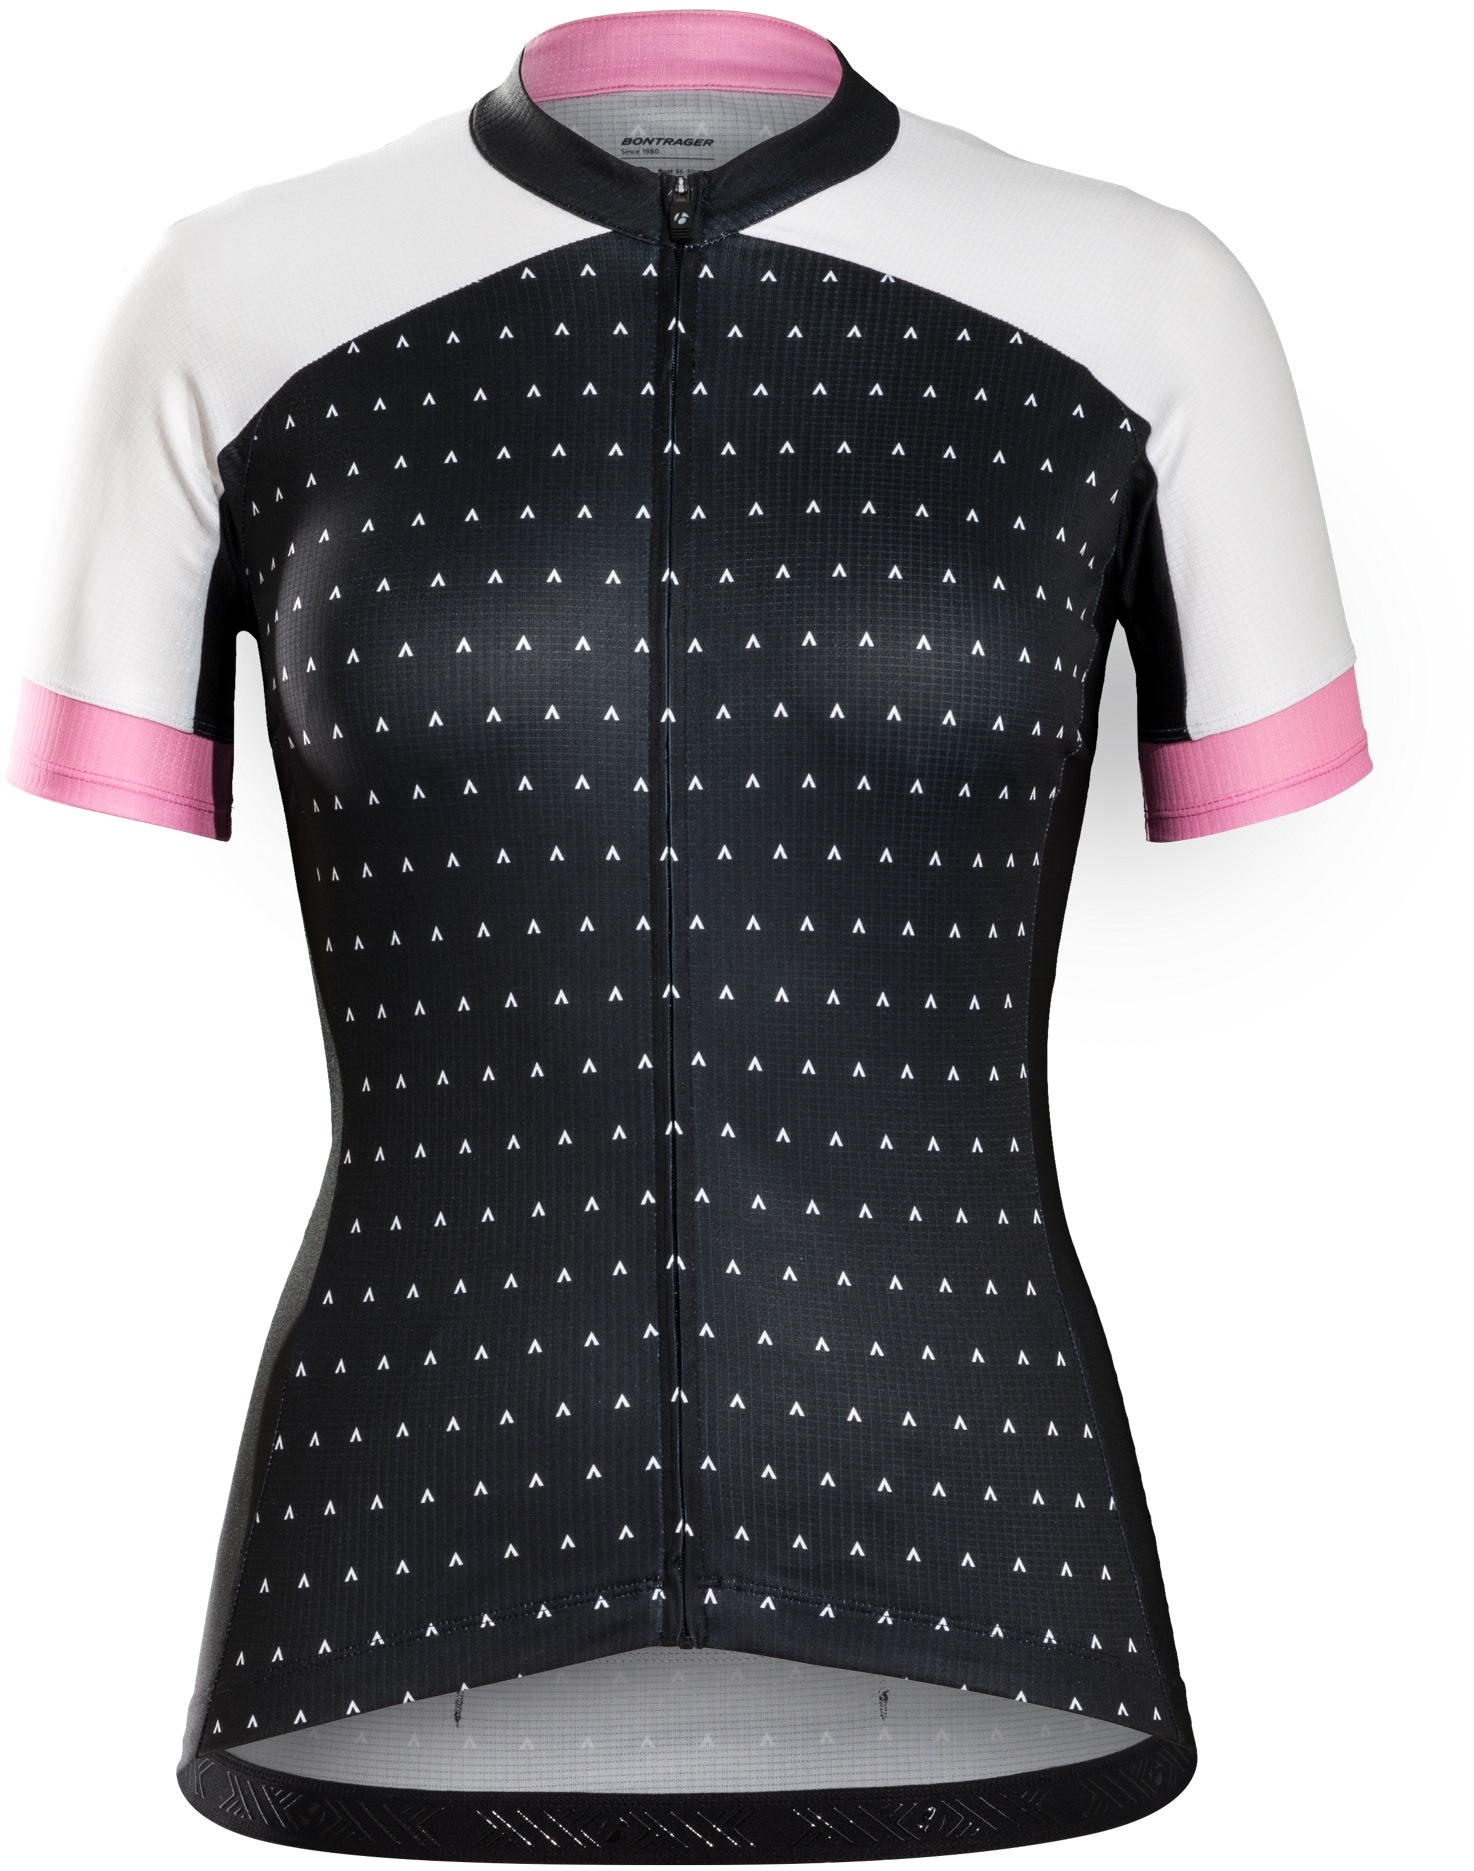 bontrager cycling jersey